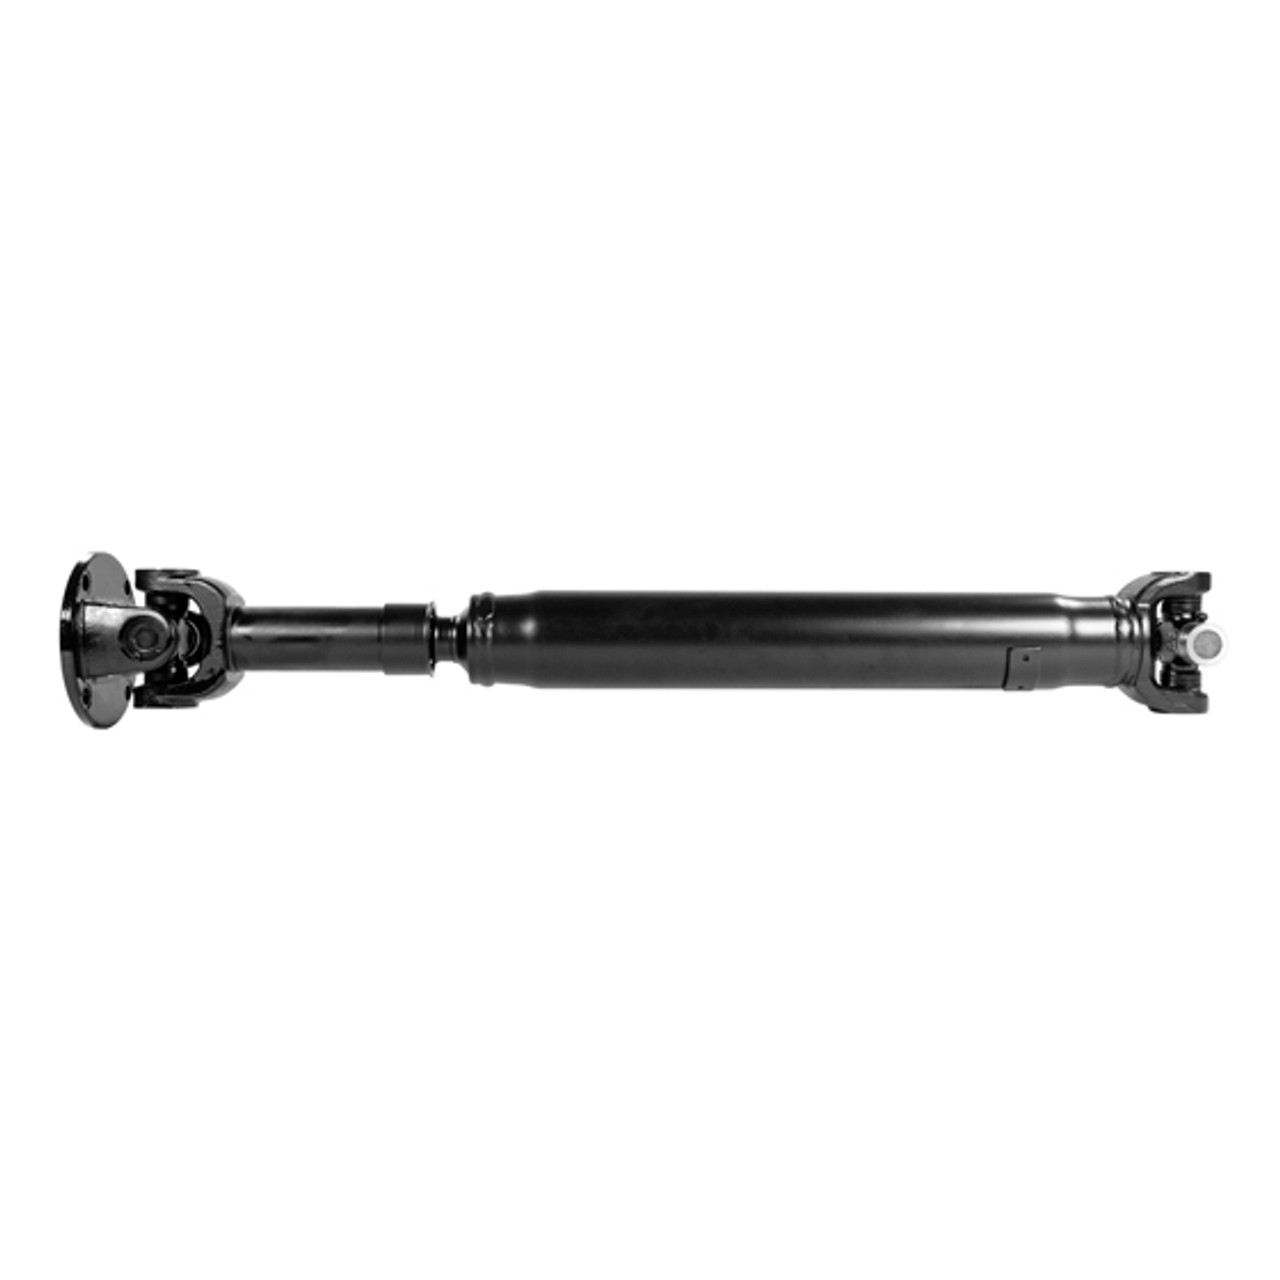 NEW USA Standard Front Driveshaft for GM Truck & SUV, 28-1/2" Center to Center